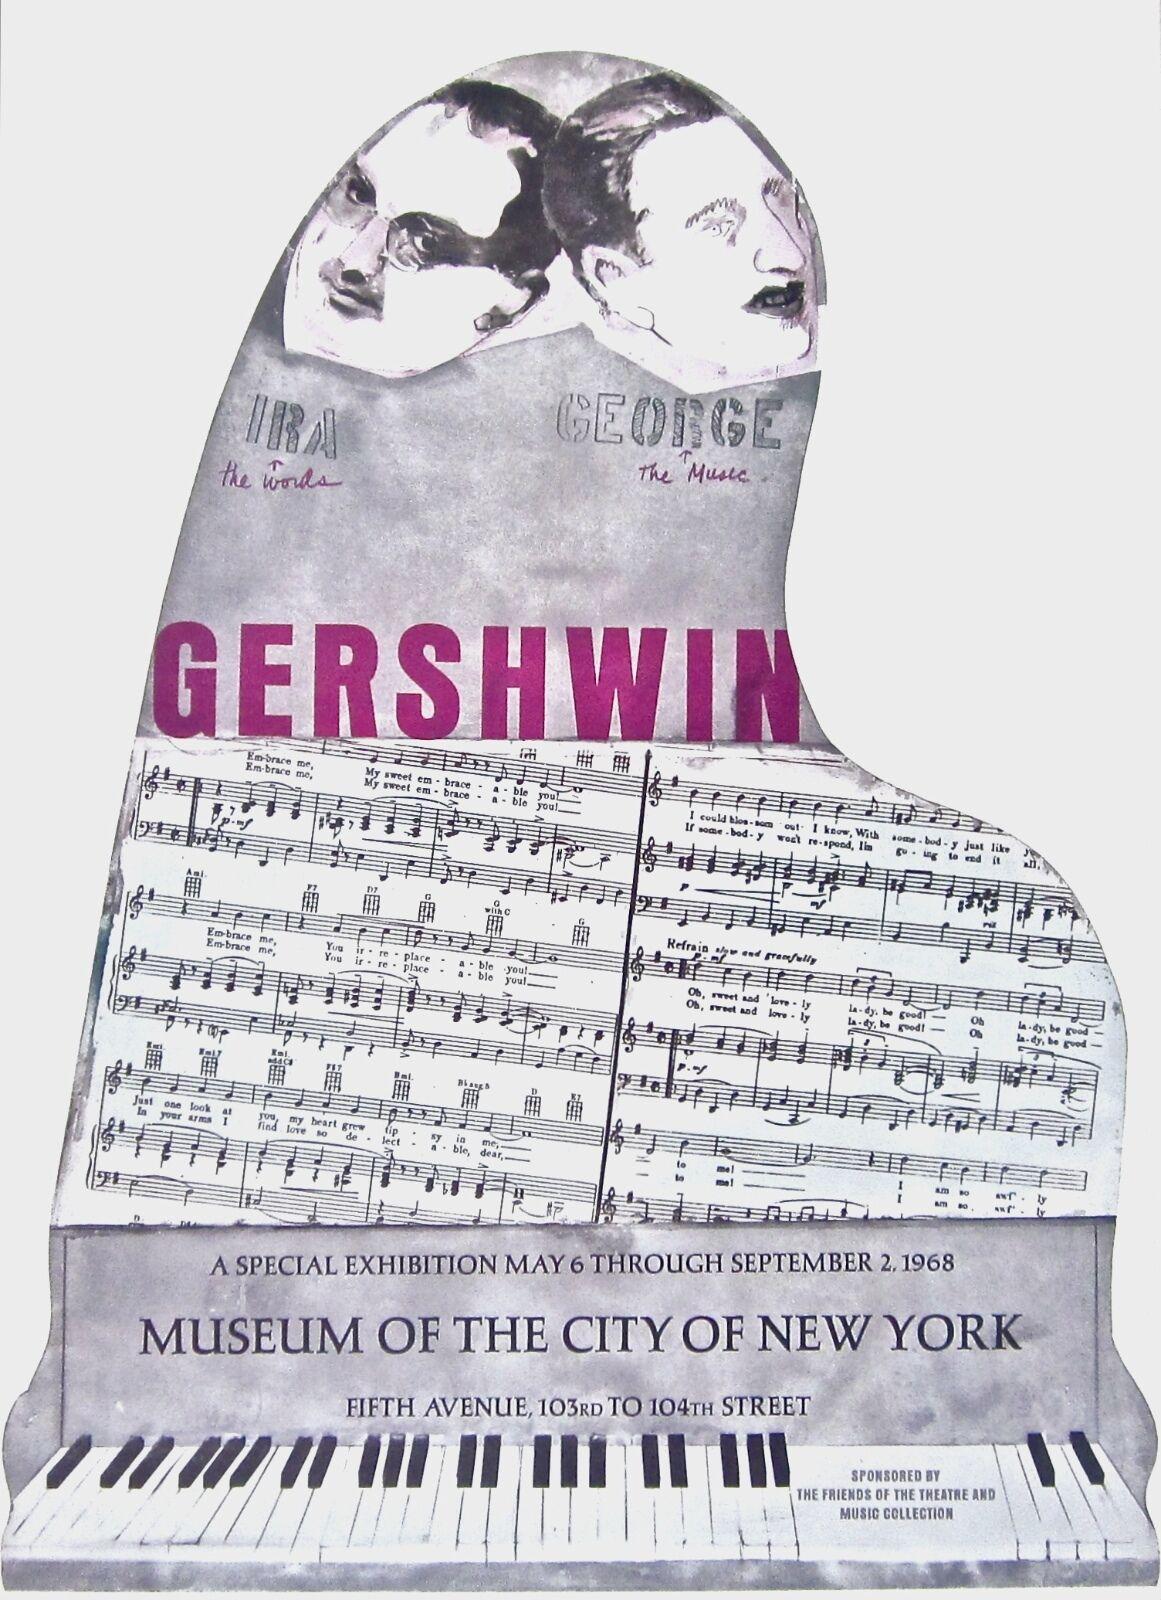 Gershwin Brothers, after Larry Rivers